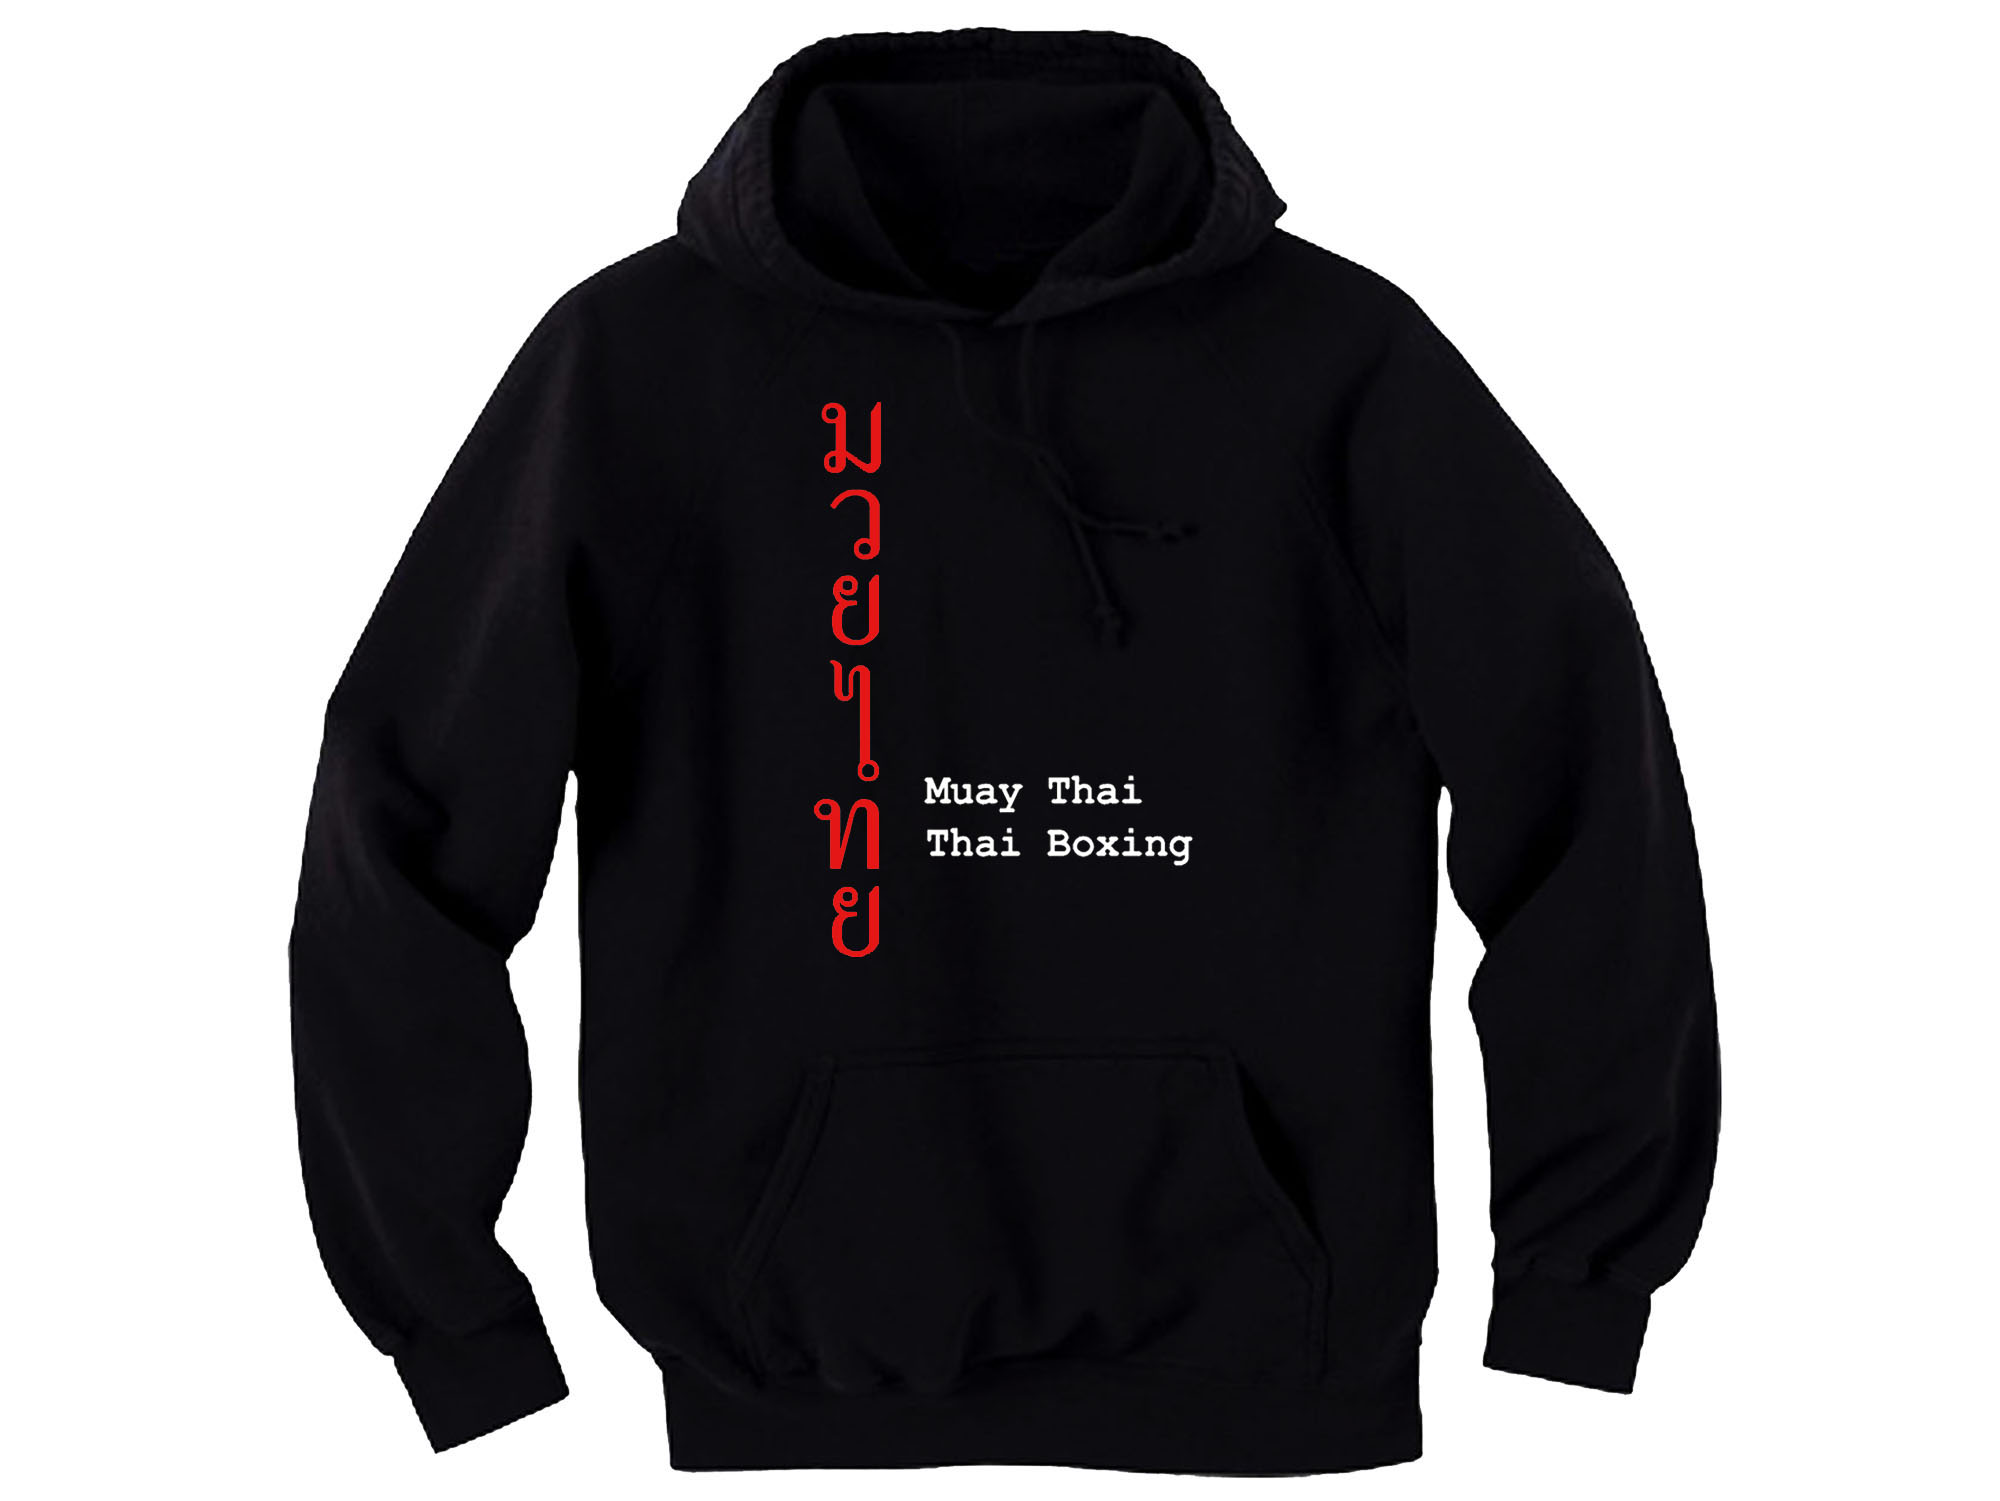 Muay Thai red/white print sweat hoodie for man/women or youth